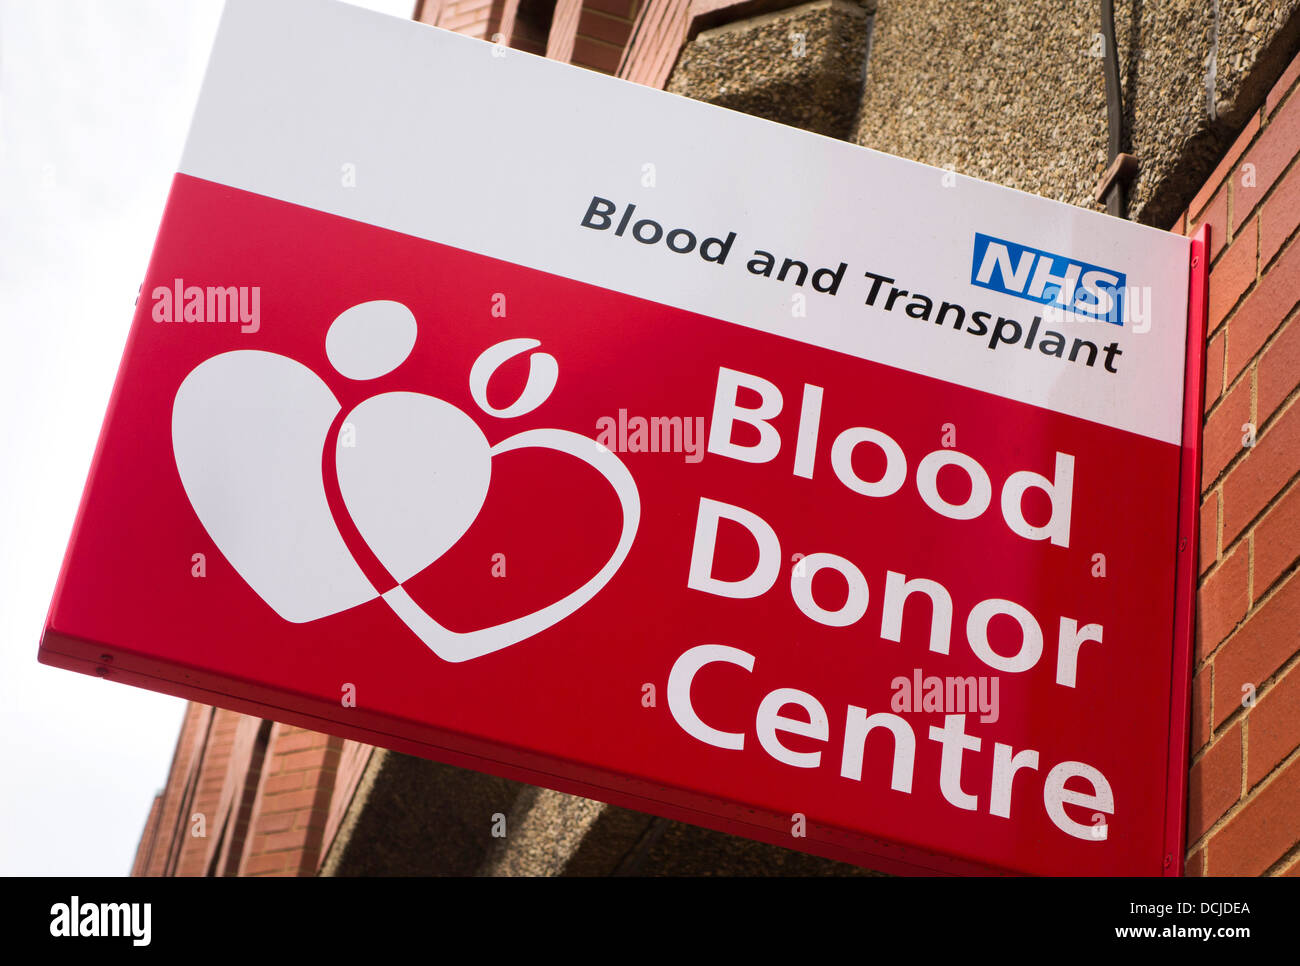 A Blood Donor Centre in Sheffield, England, U.K. Stock Photo